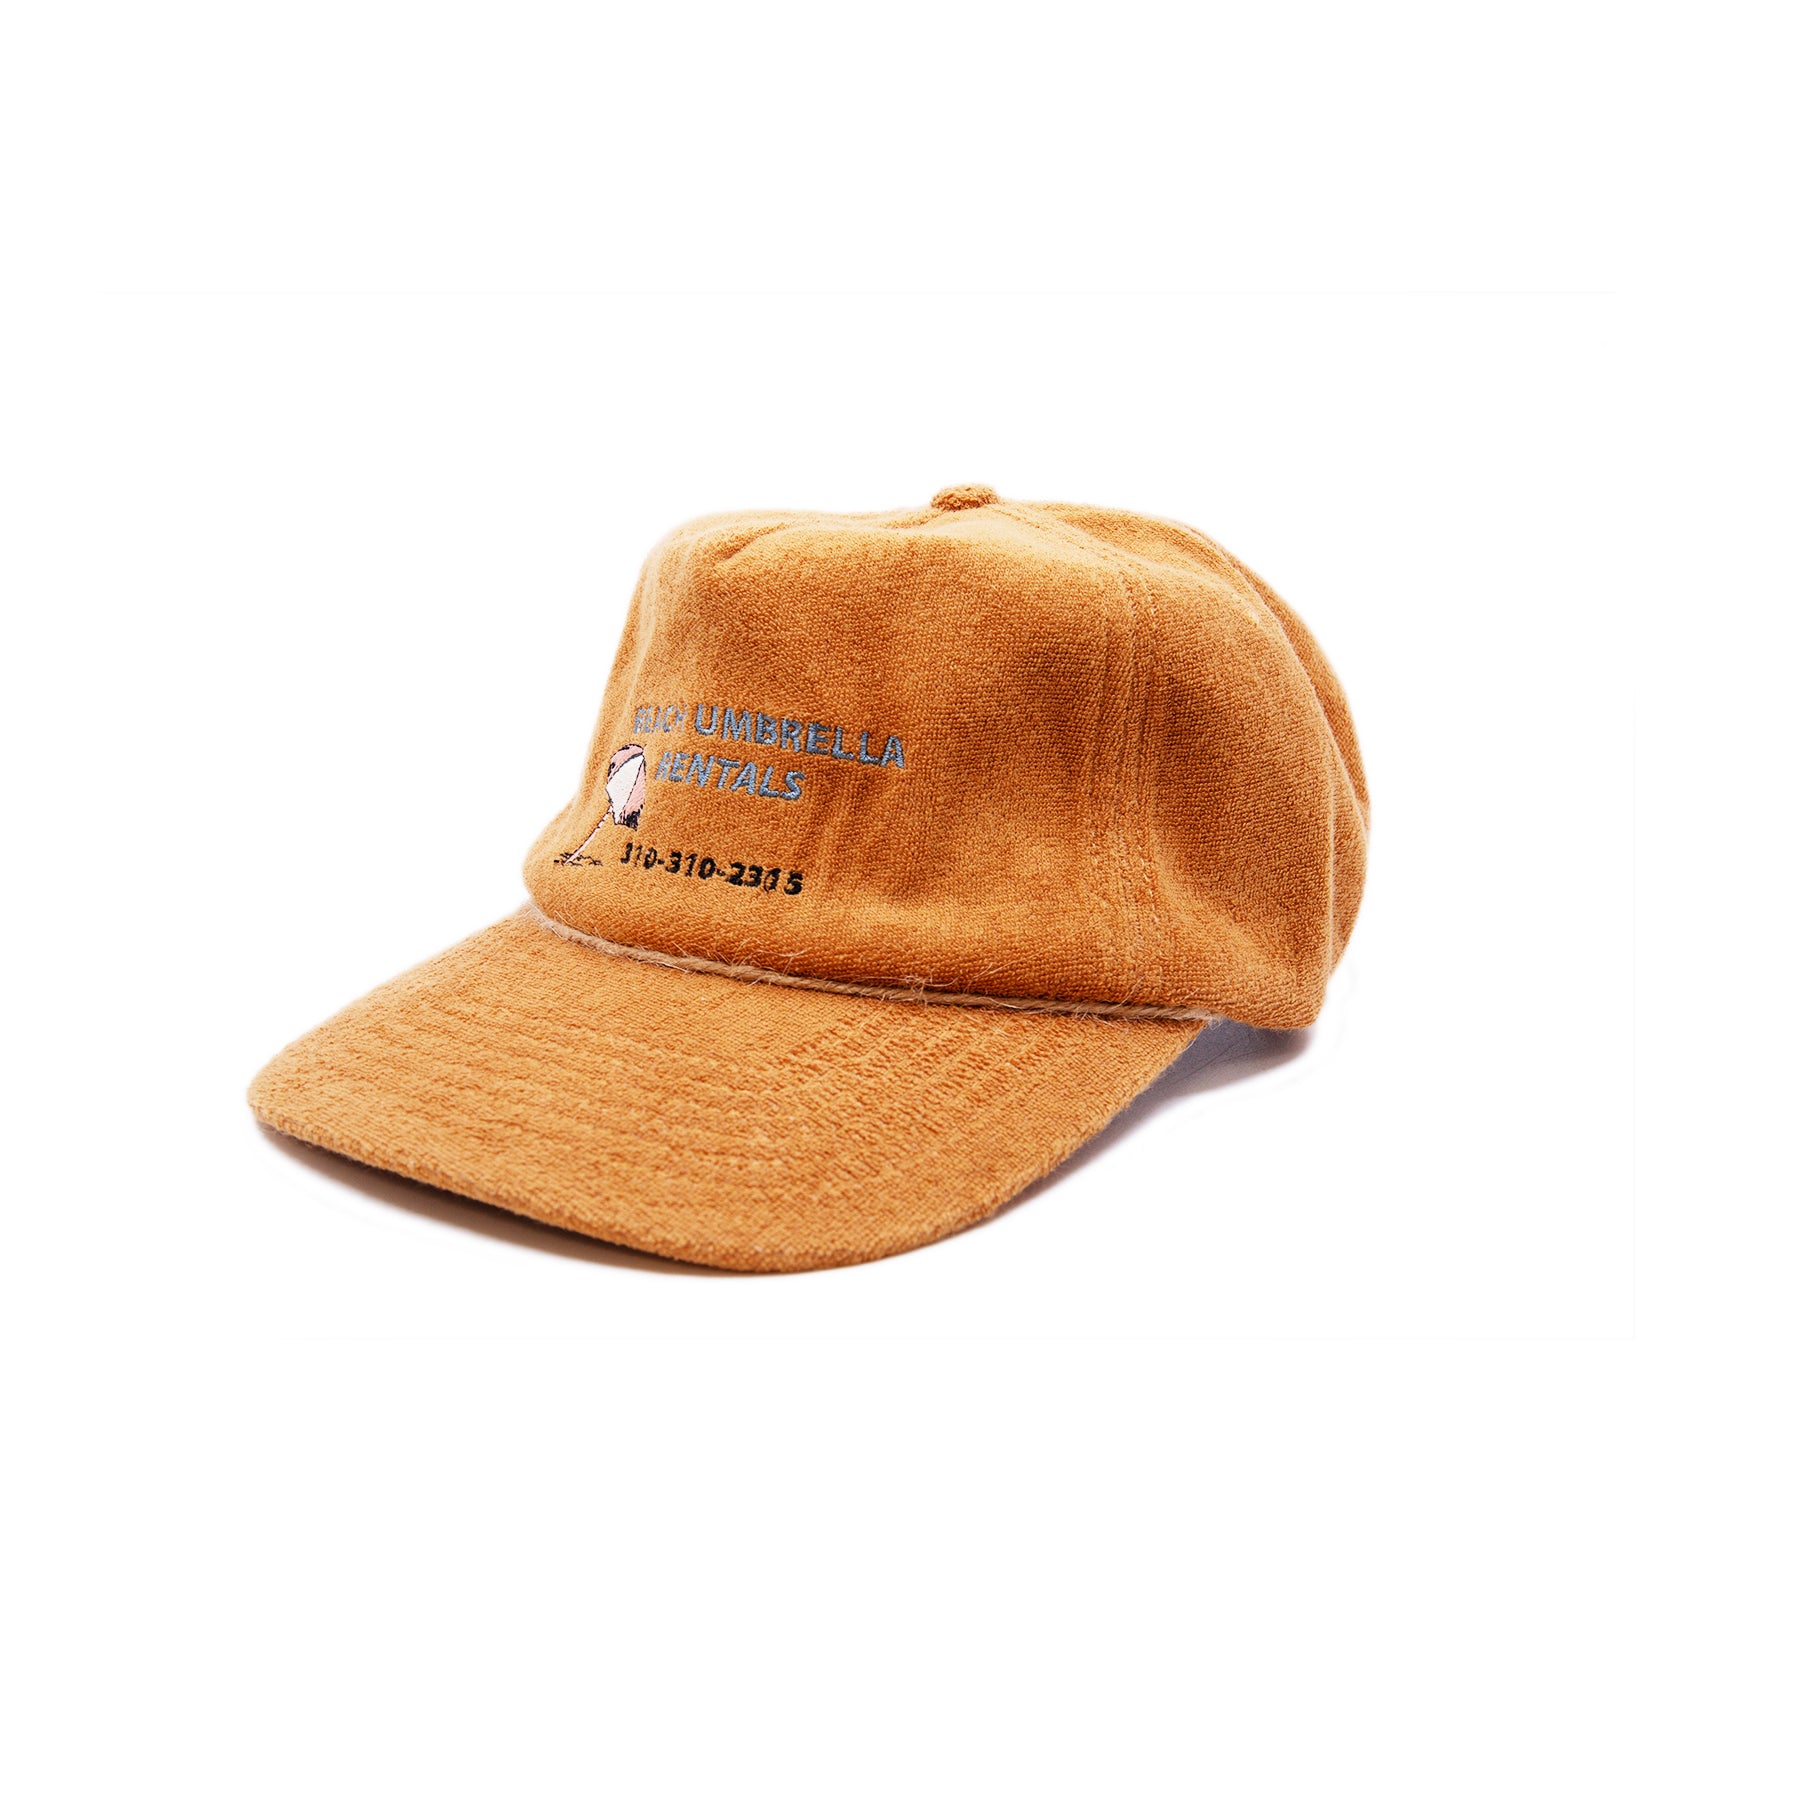 Camel terrycloth baseball cap  Natural hemp braided twine cord along brim  Beach Umbrella Rentals hotline graphic embroidered at front  Embroidered matchstick on reverse side  One size fits all  Made in Los Angeles   